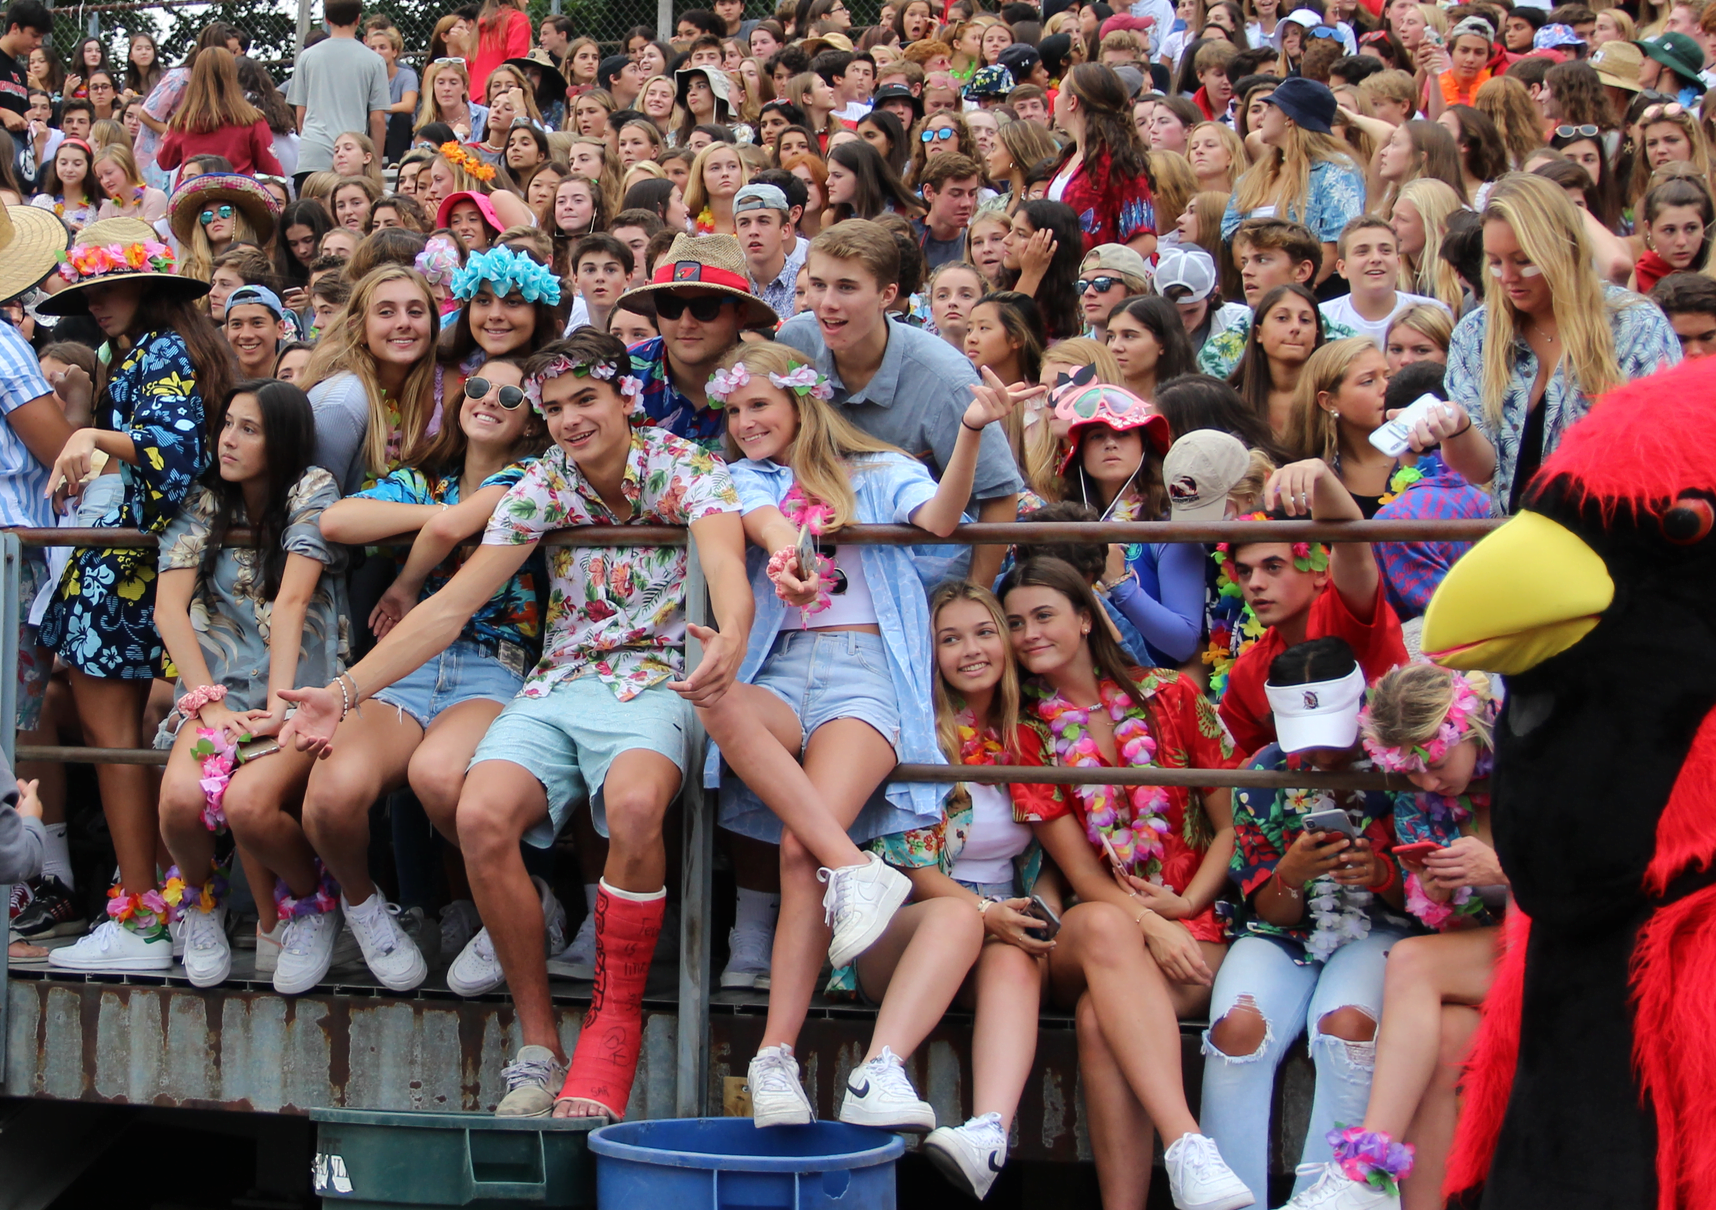 Cardinal Crazies selected a beach theme for the season opener football game vs Danbury Hatters. Sept 14, 2019 Photo: Leslie Yager